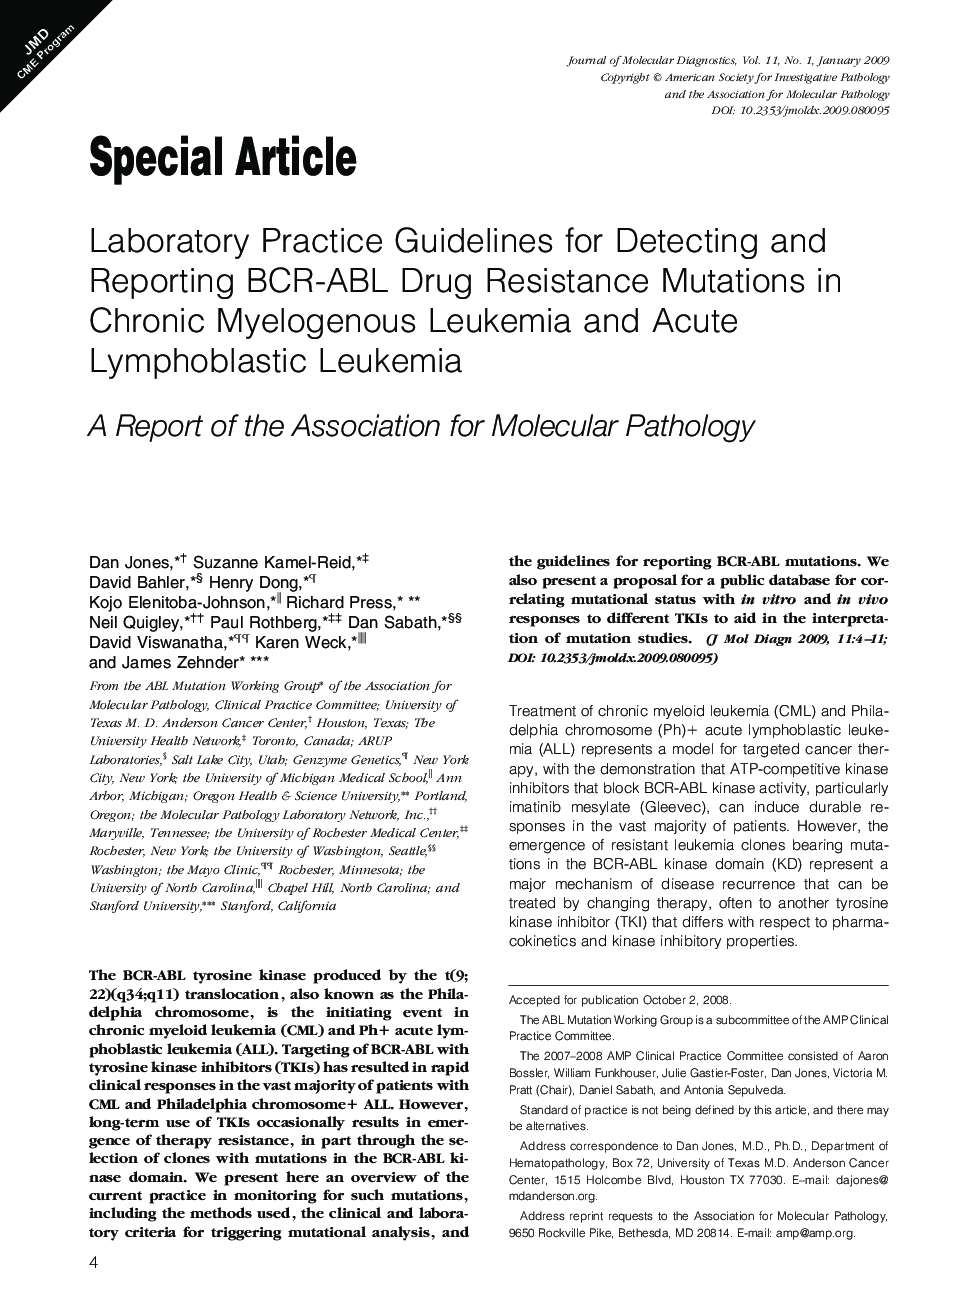 Laboratory Practice Guidelines for Detecting and Reporting BCR-ABL Drug Resistance Mutations in Chronic Myelogenous Leukemia and Acute Lymphoblastic Leukemia : A Report of the Association for Molecular Pathology